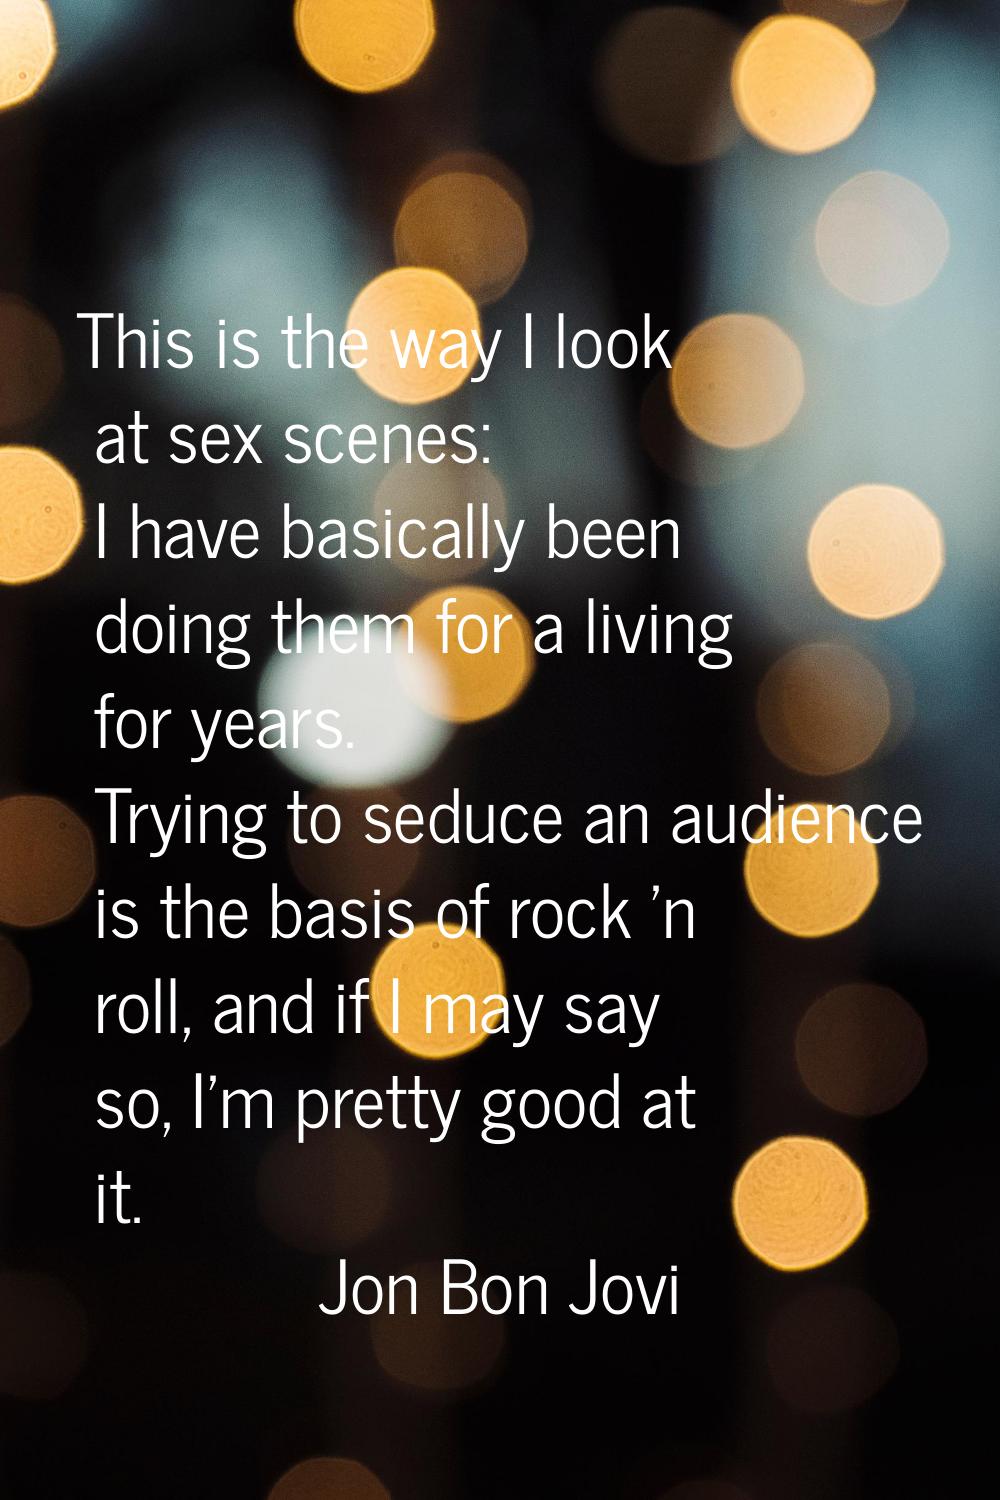 This is the way I look at sex scenes: I have basically been doing them for a living for years. Tryi